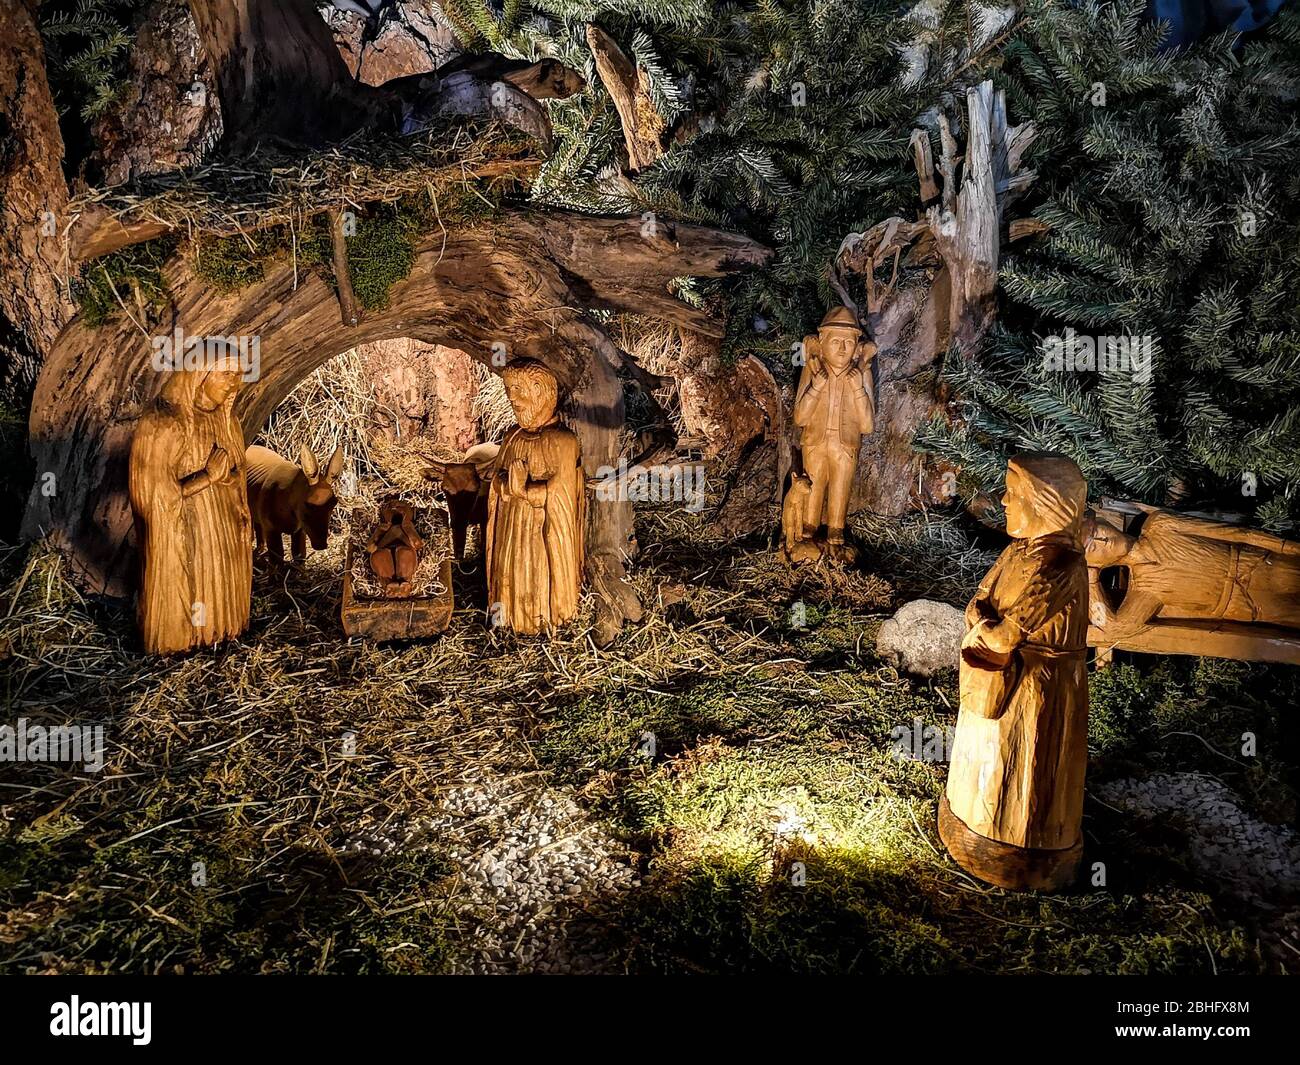 Ossana, Italy - December 26, 2019: Nativity scene made with hand-carved wooden figurines. Stock Photo